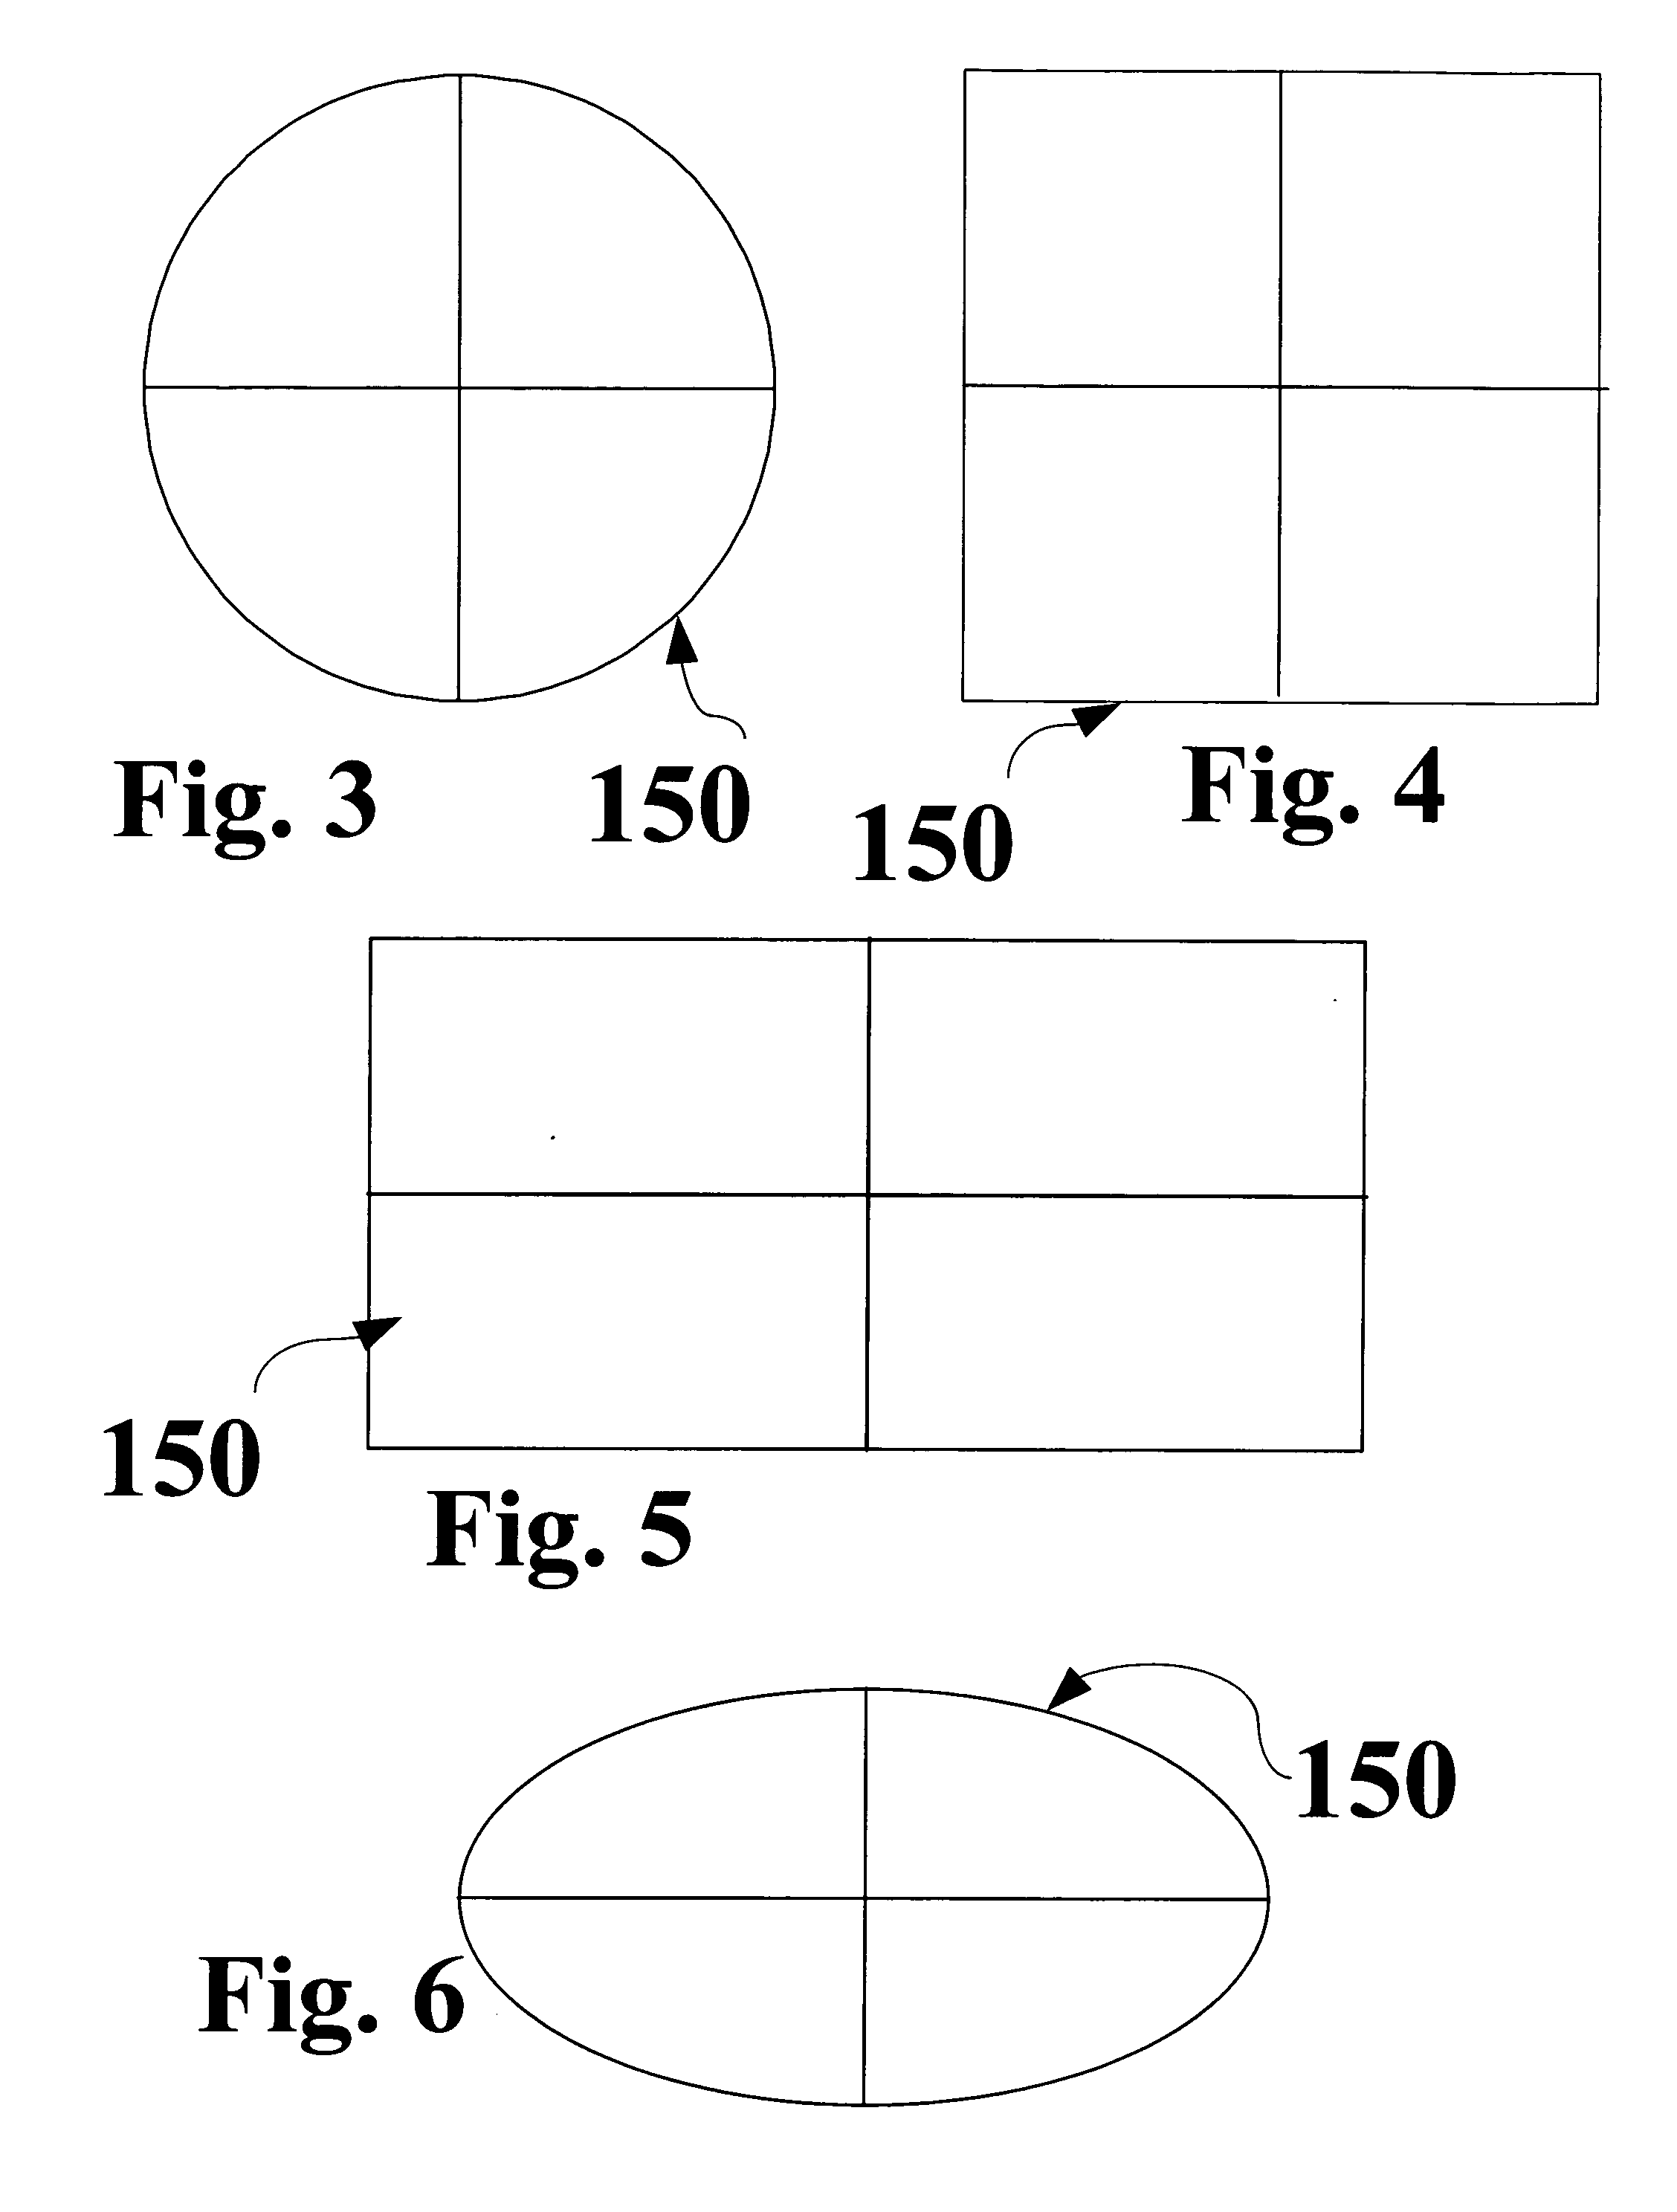 Method of applying makeup to provide a more natural appearance and compact